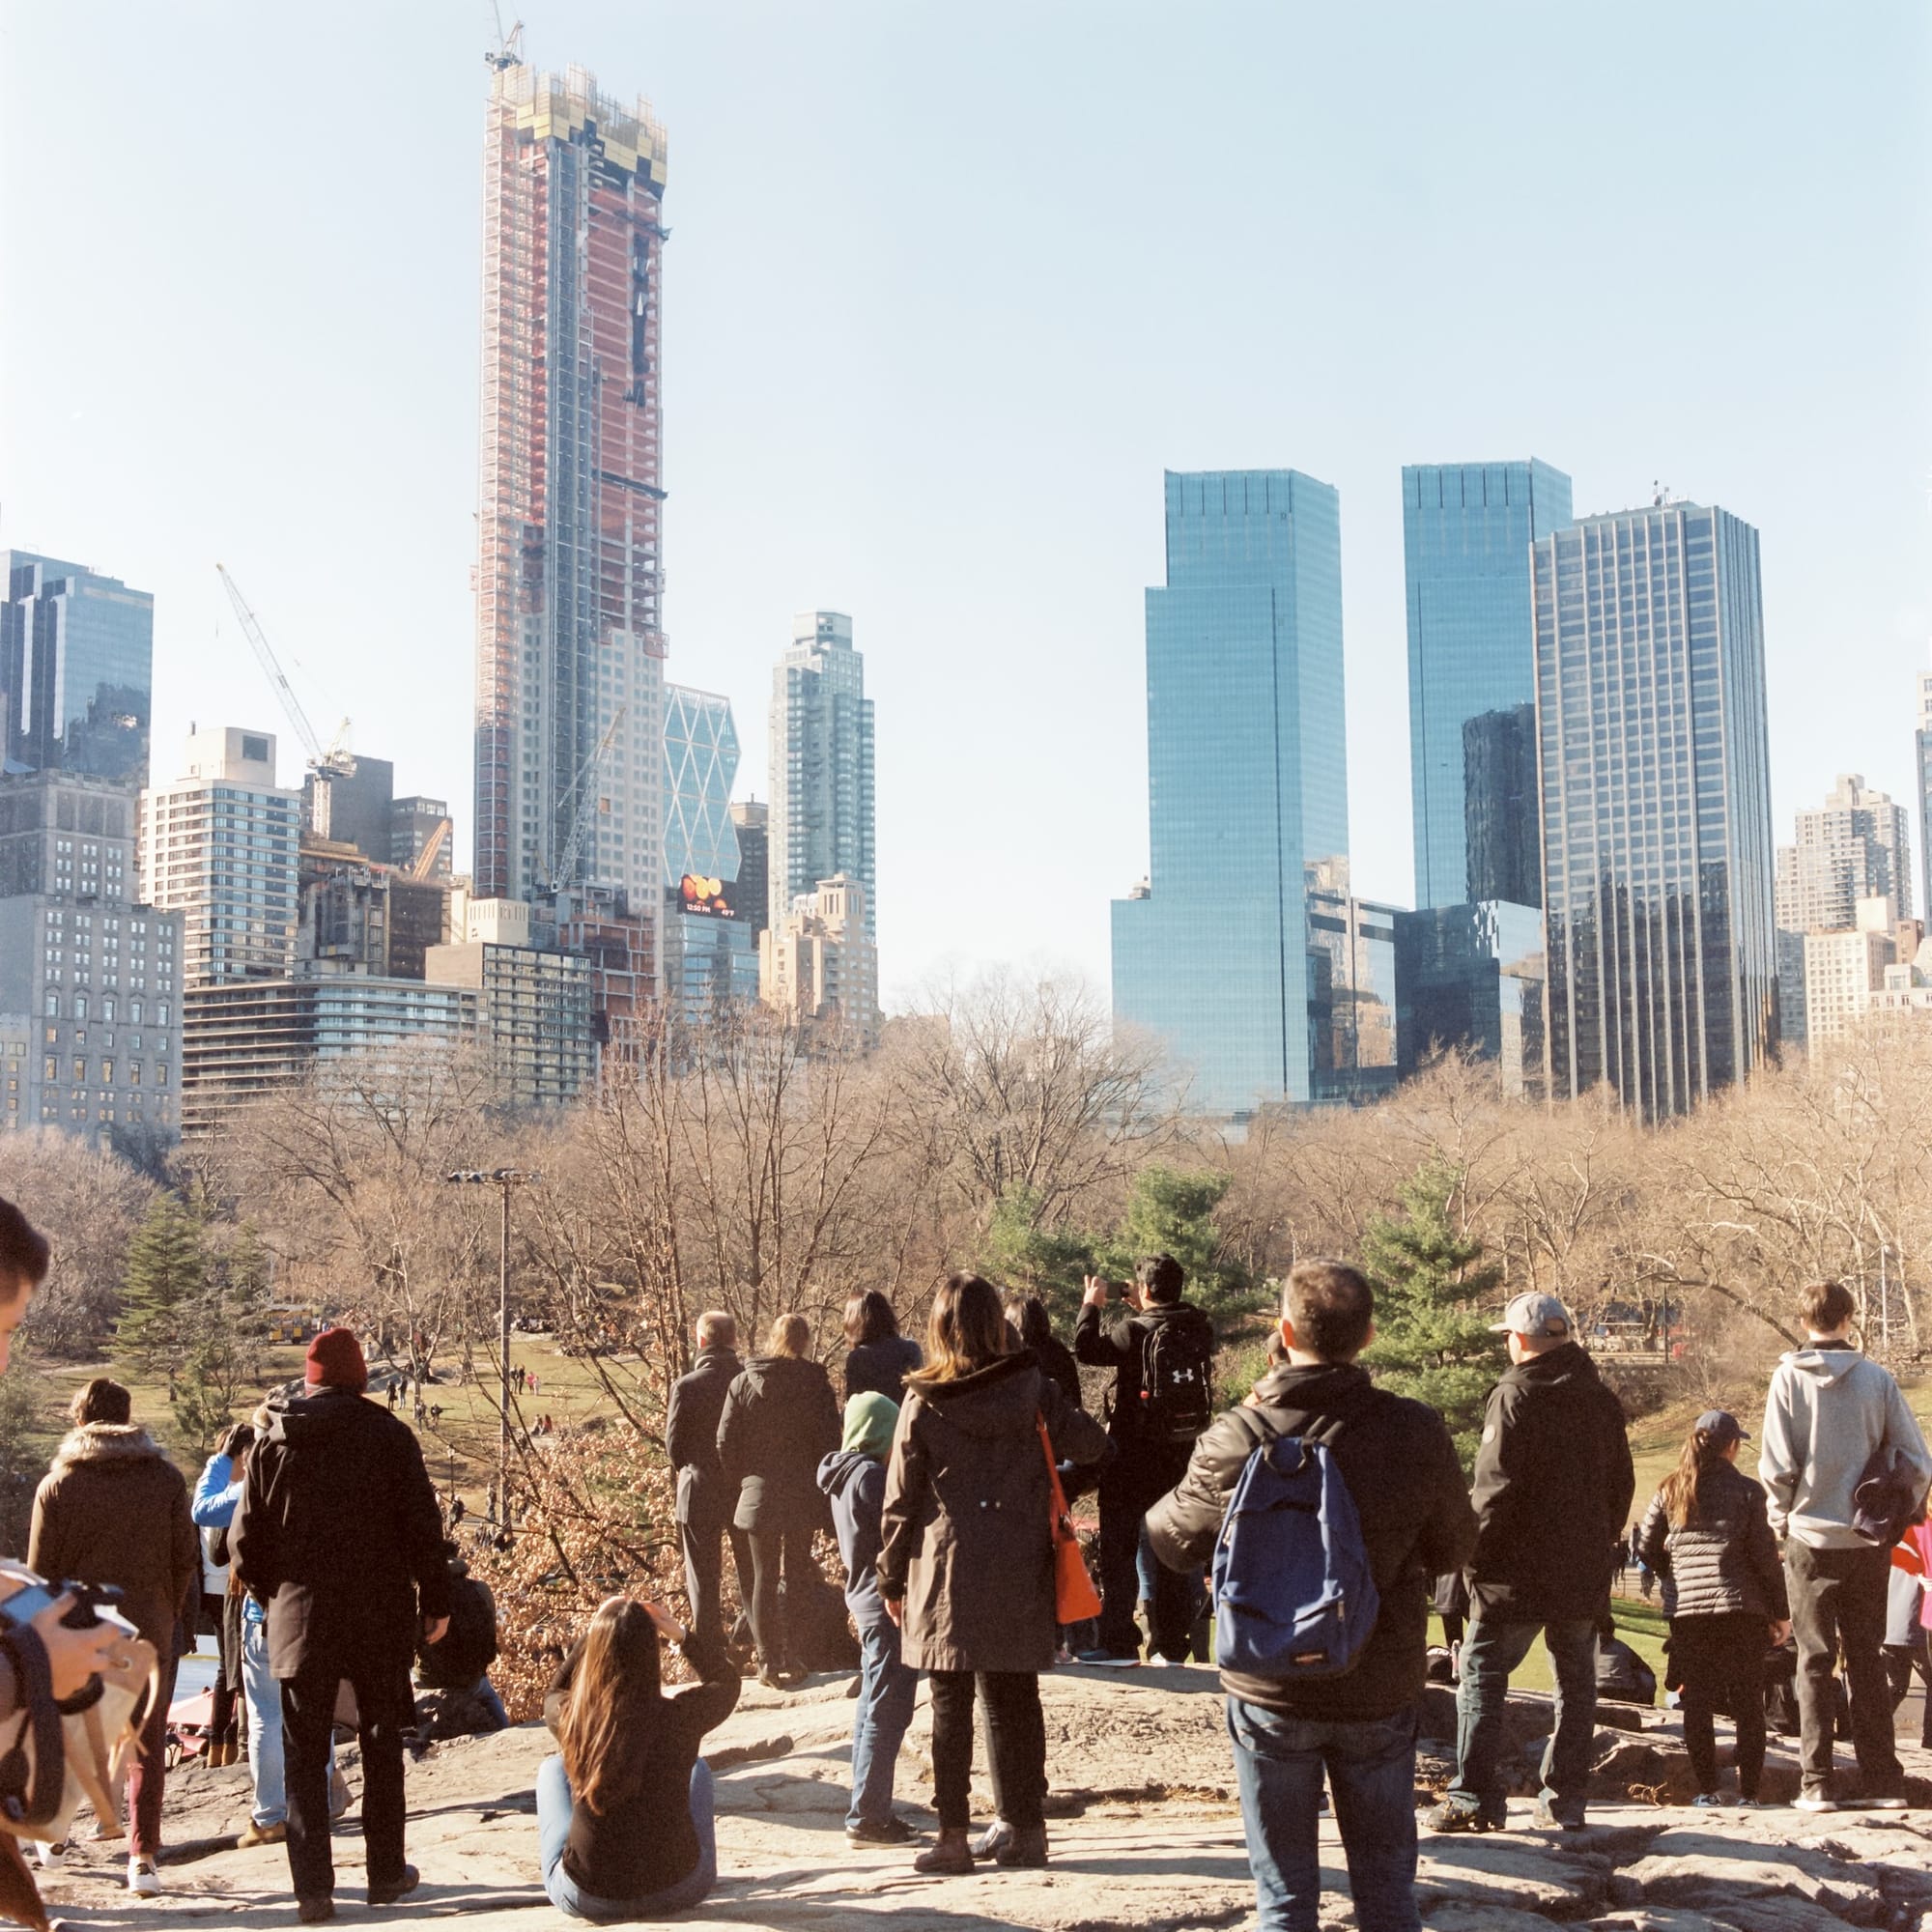 People standing in Central Park, NYC, looking at the skyline of skyscrapers seemingly growing out the treeline.